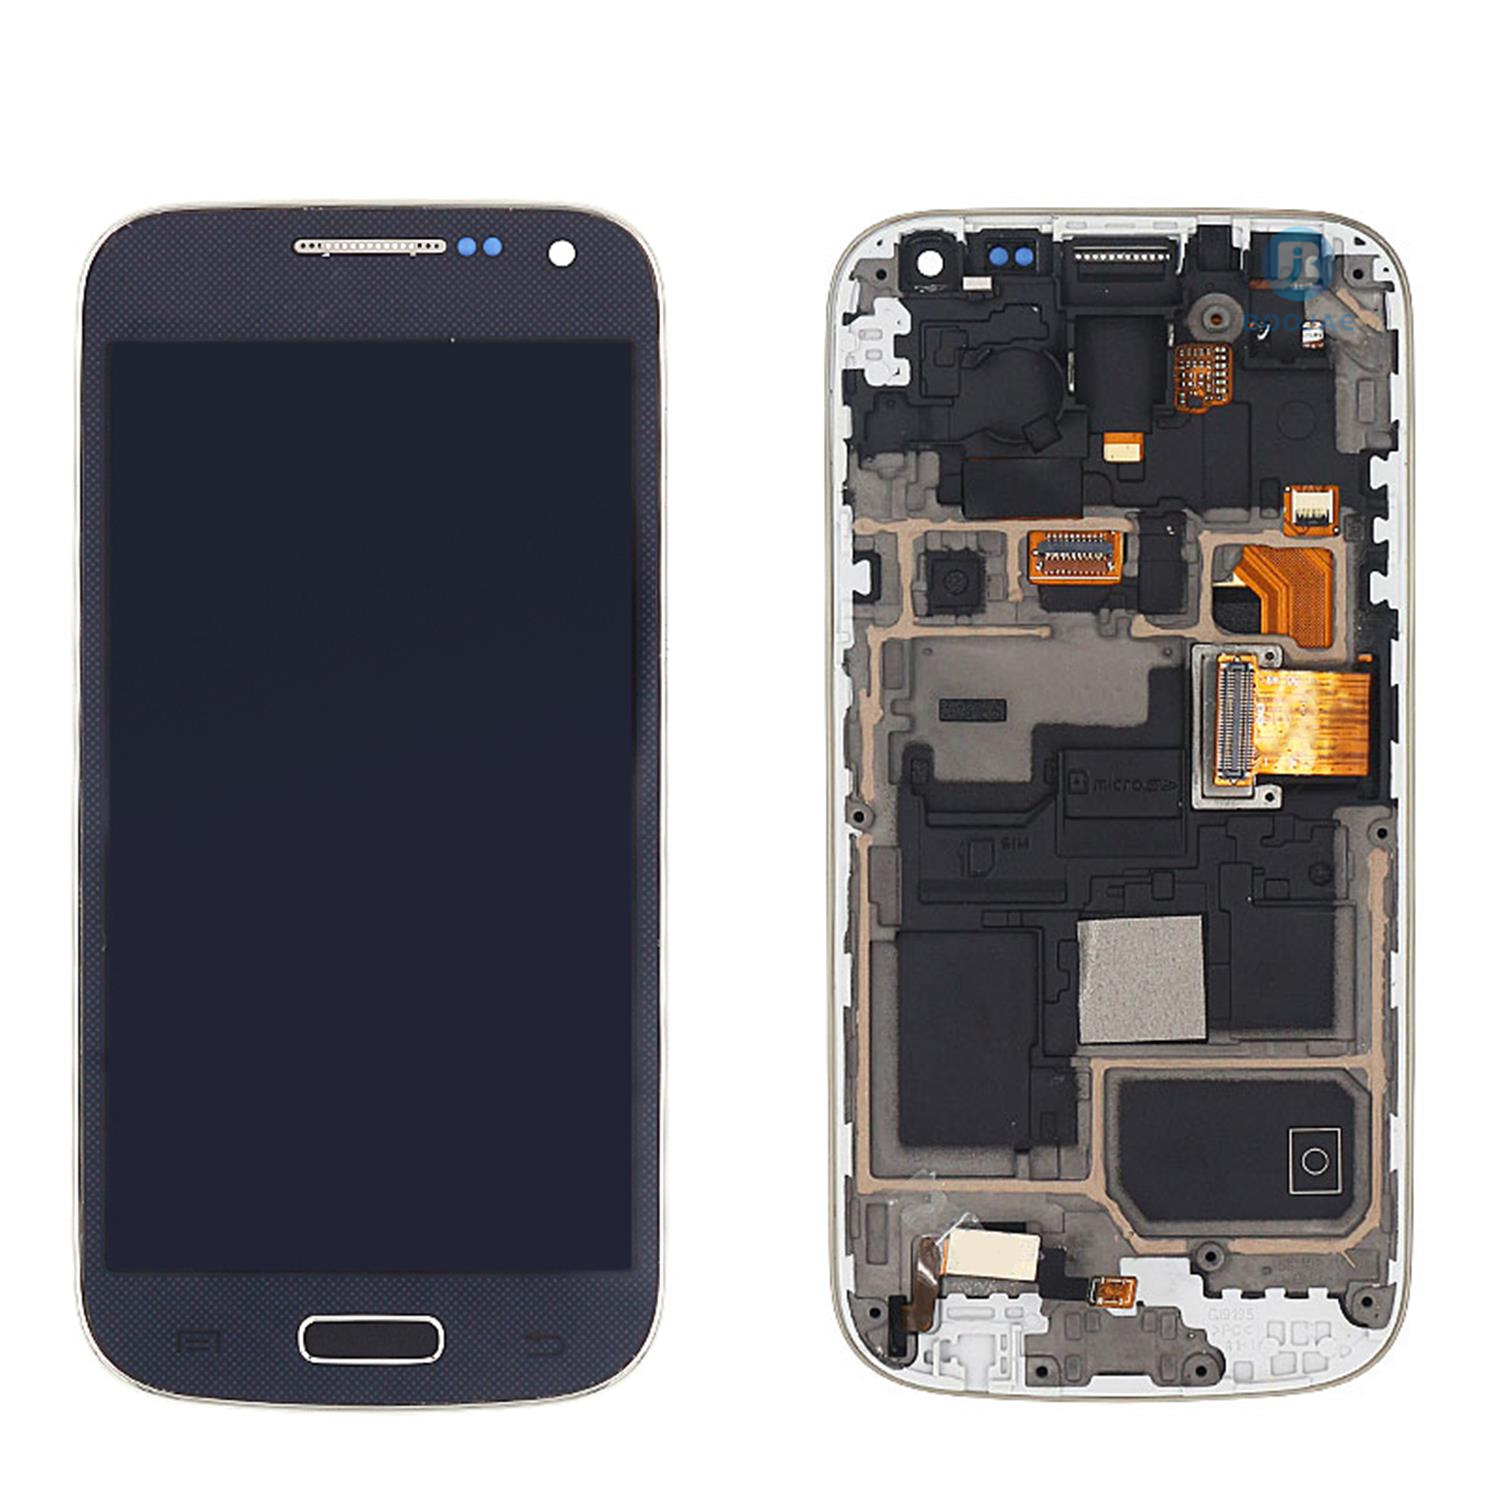 Samsung Galaxy S4 Mini LCD Screen Display and Touch Panel Digitizer Assembly Replacement